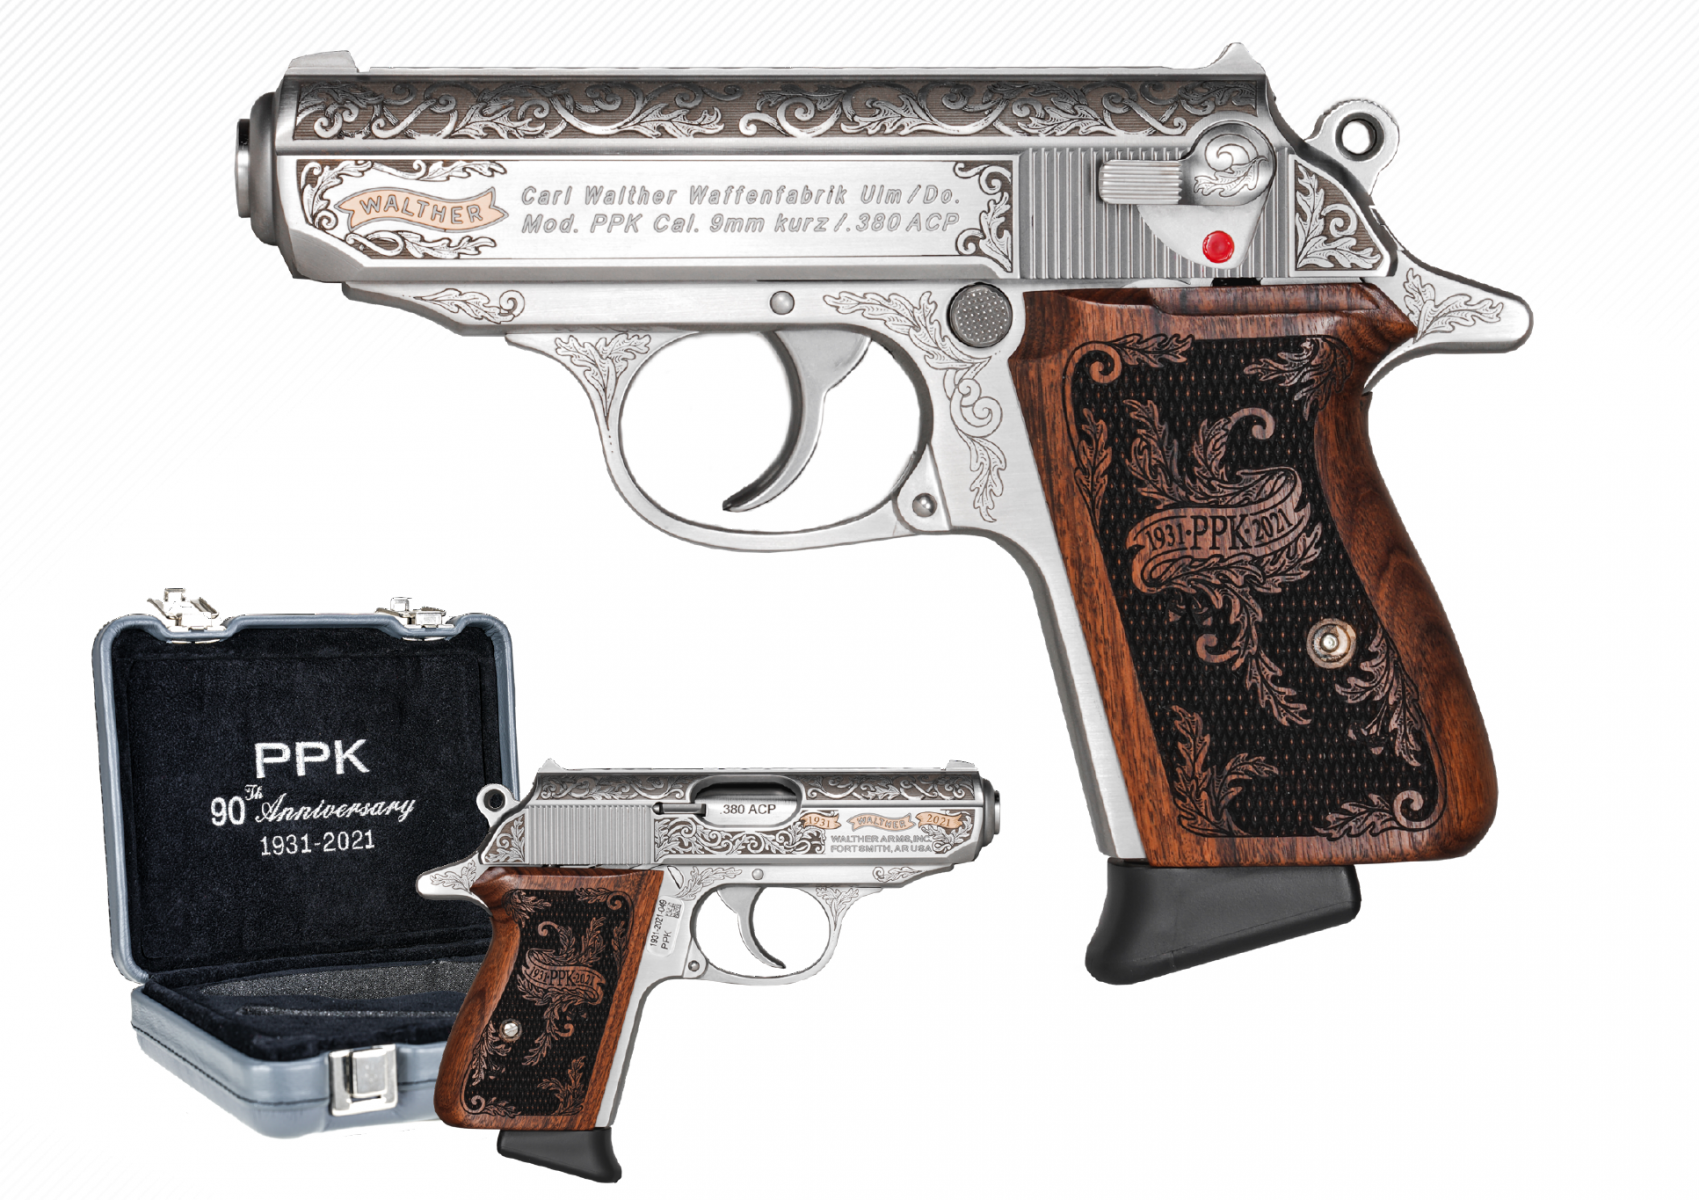 walther ppk 9mm vs 380